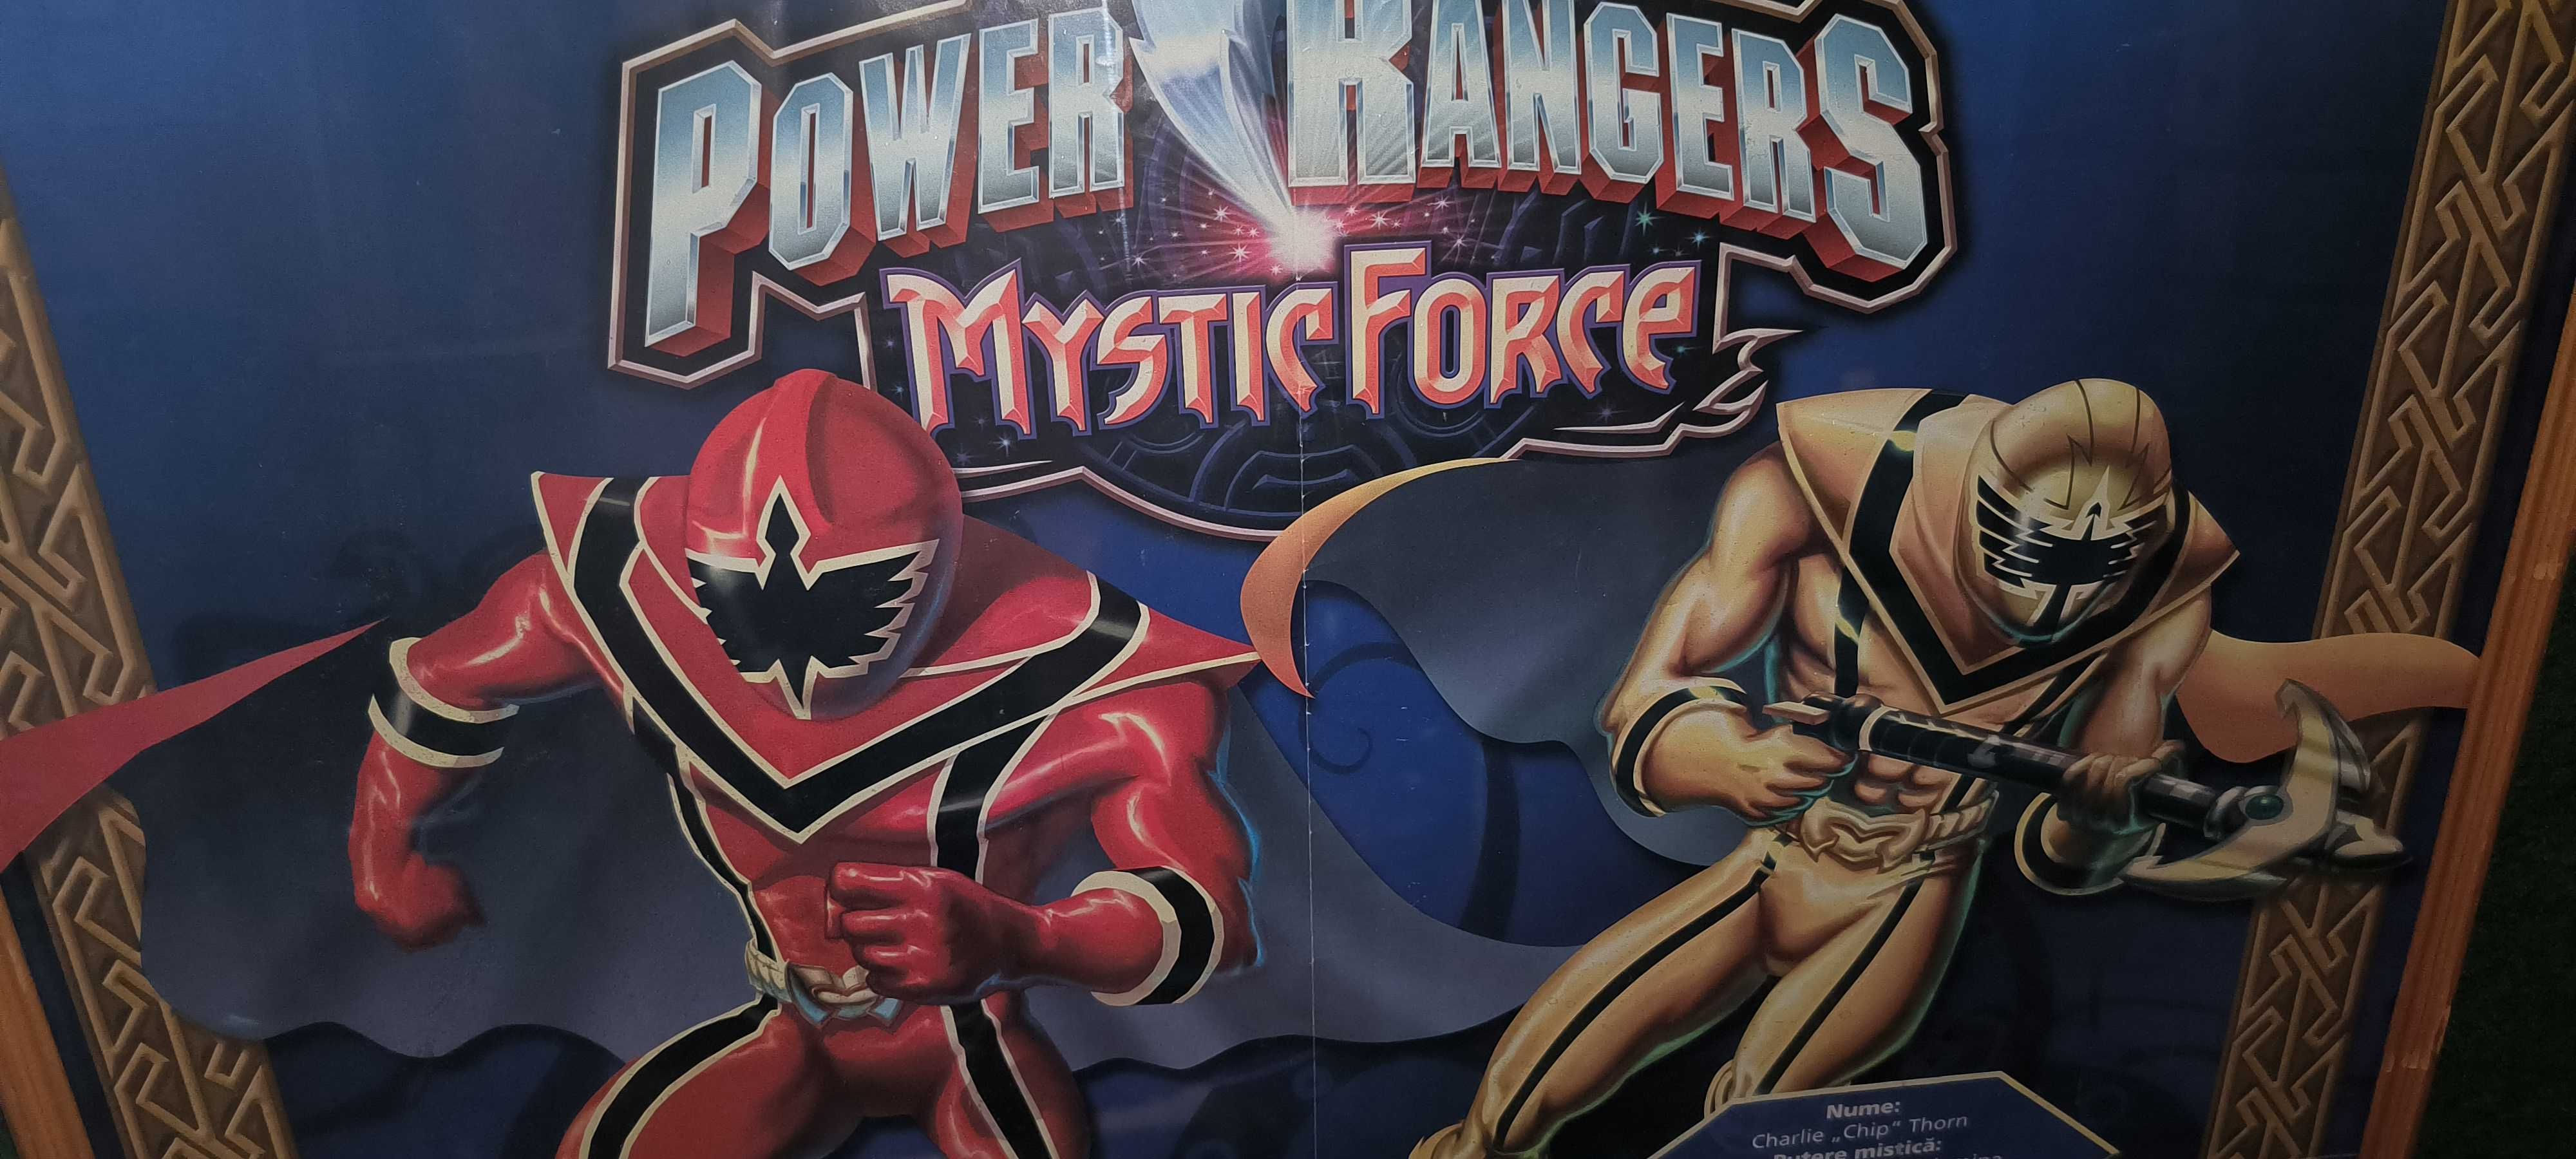 afis poster inramat + sticla geam
POWER RANGERS MYSTIC FORCE